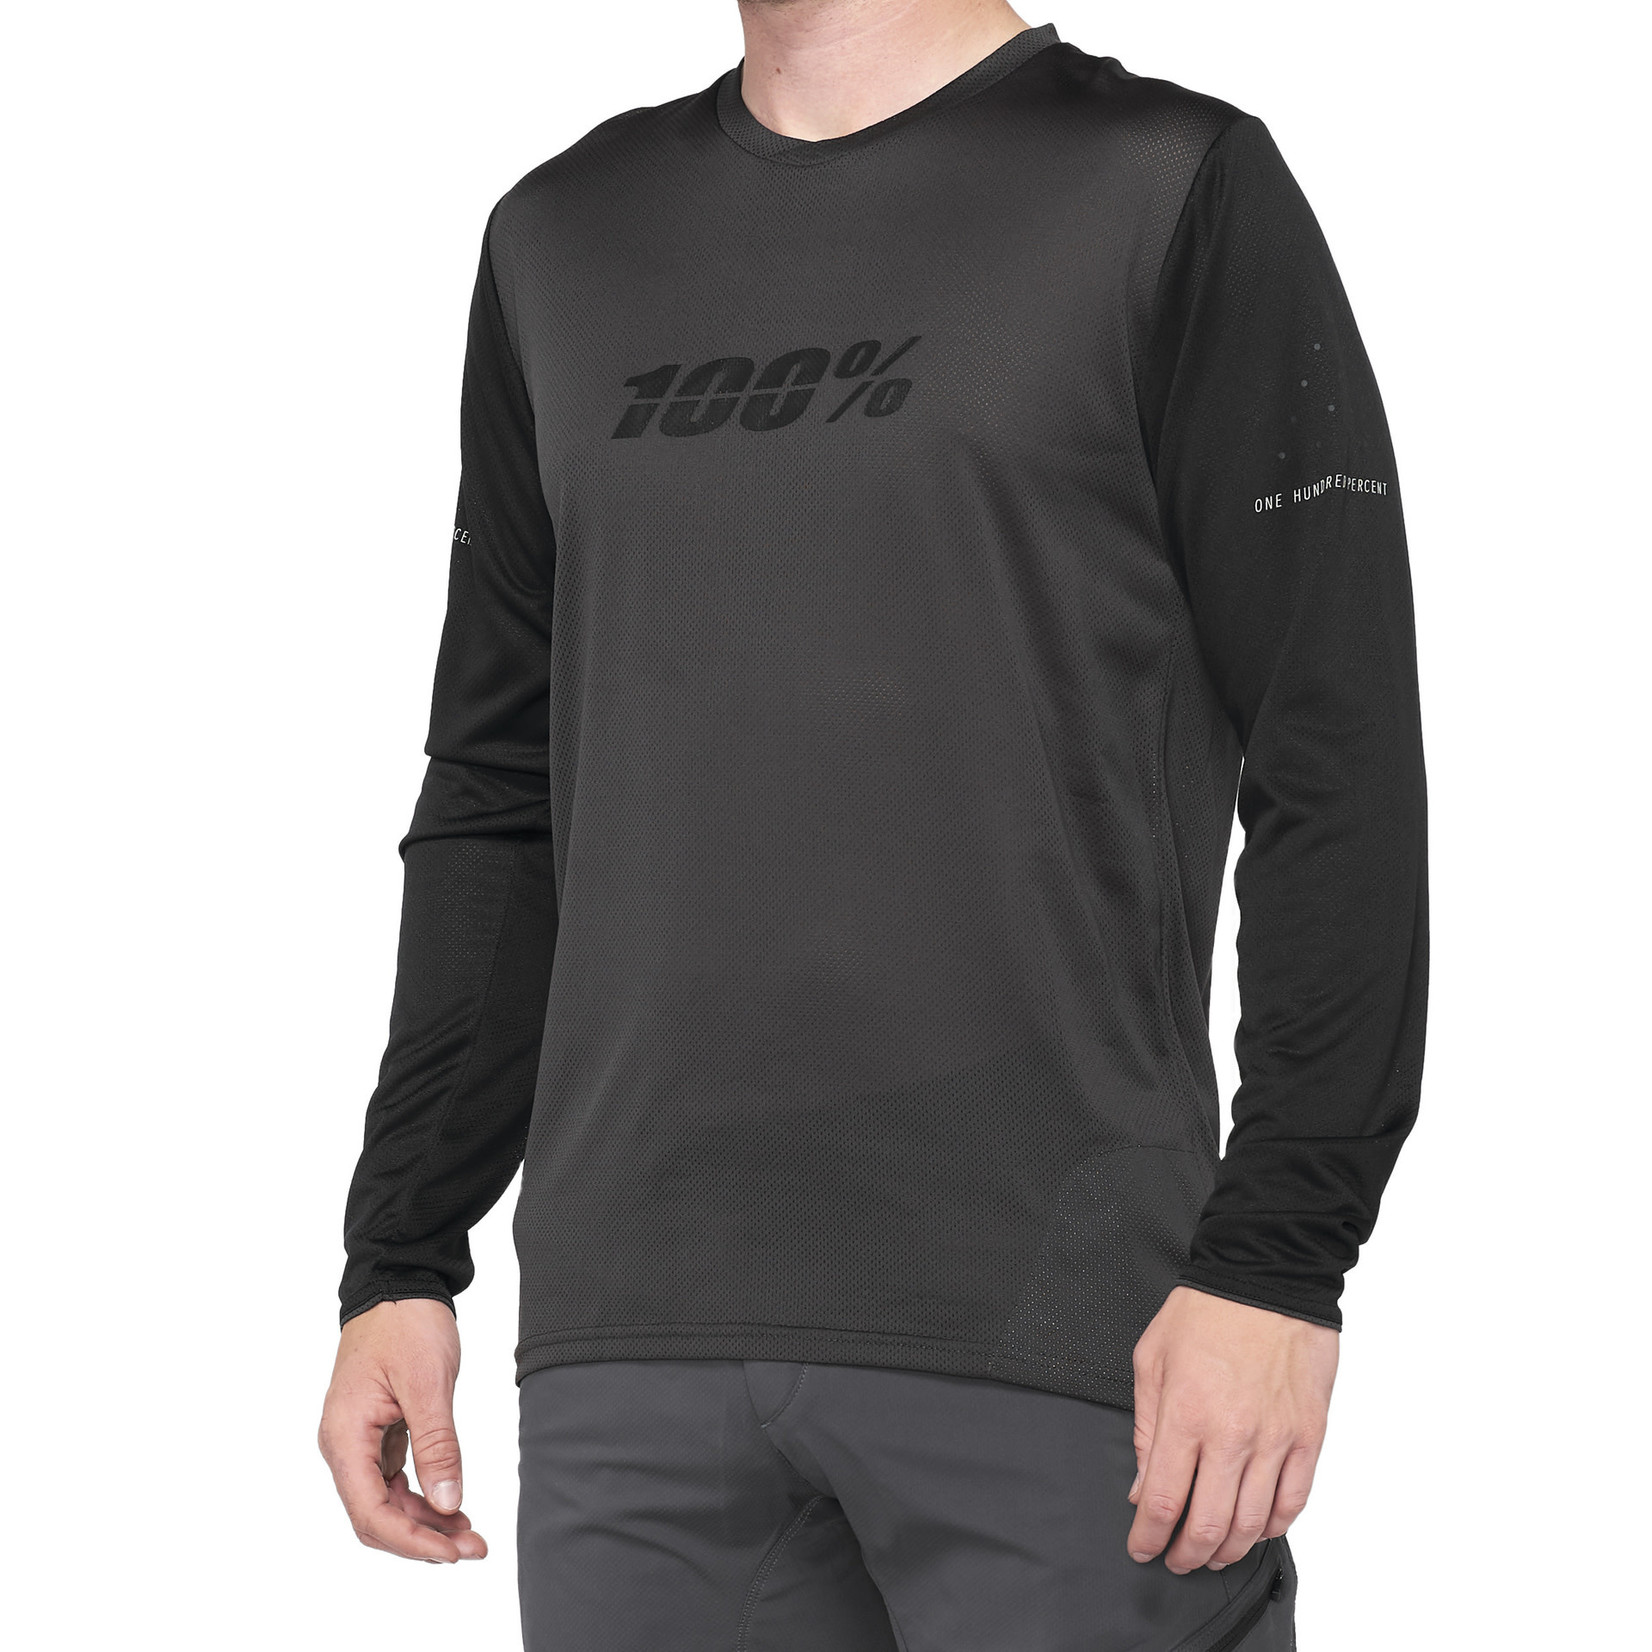 100 Percent 100% Ridecamp Long Sleeve Bike Jersey - Black/Charcoal 100% Polyester